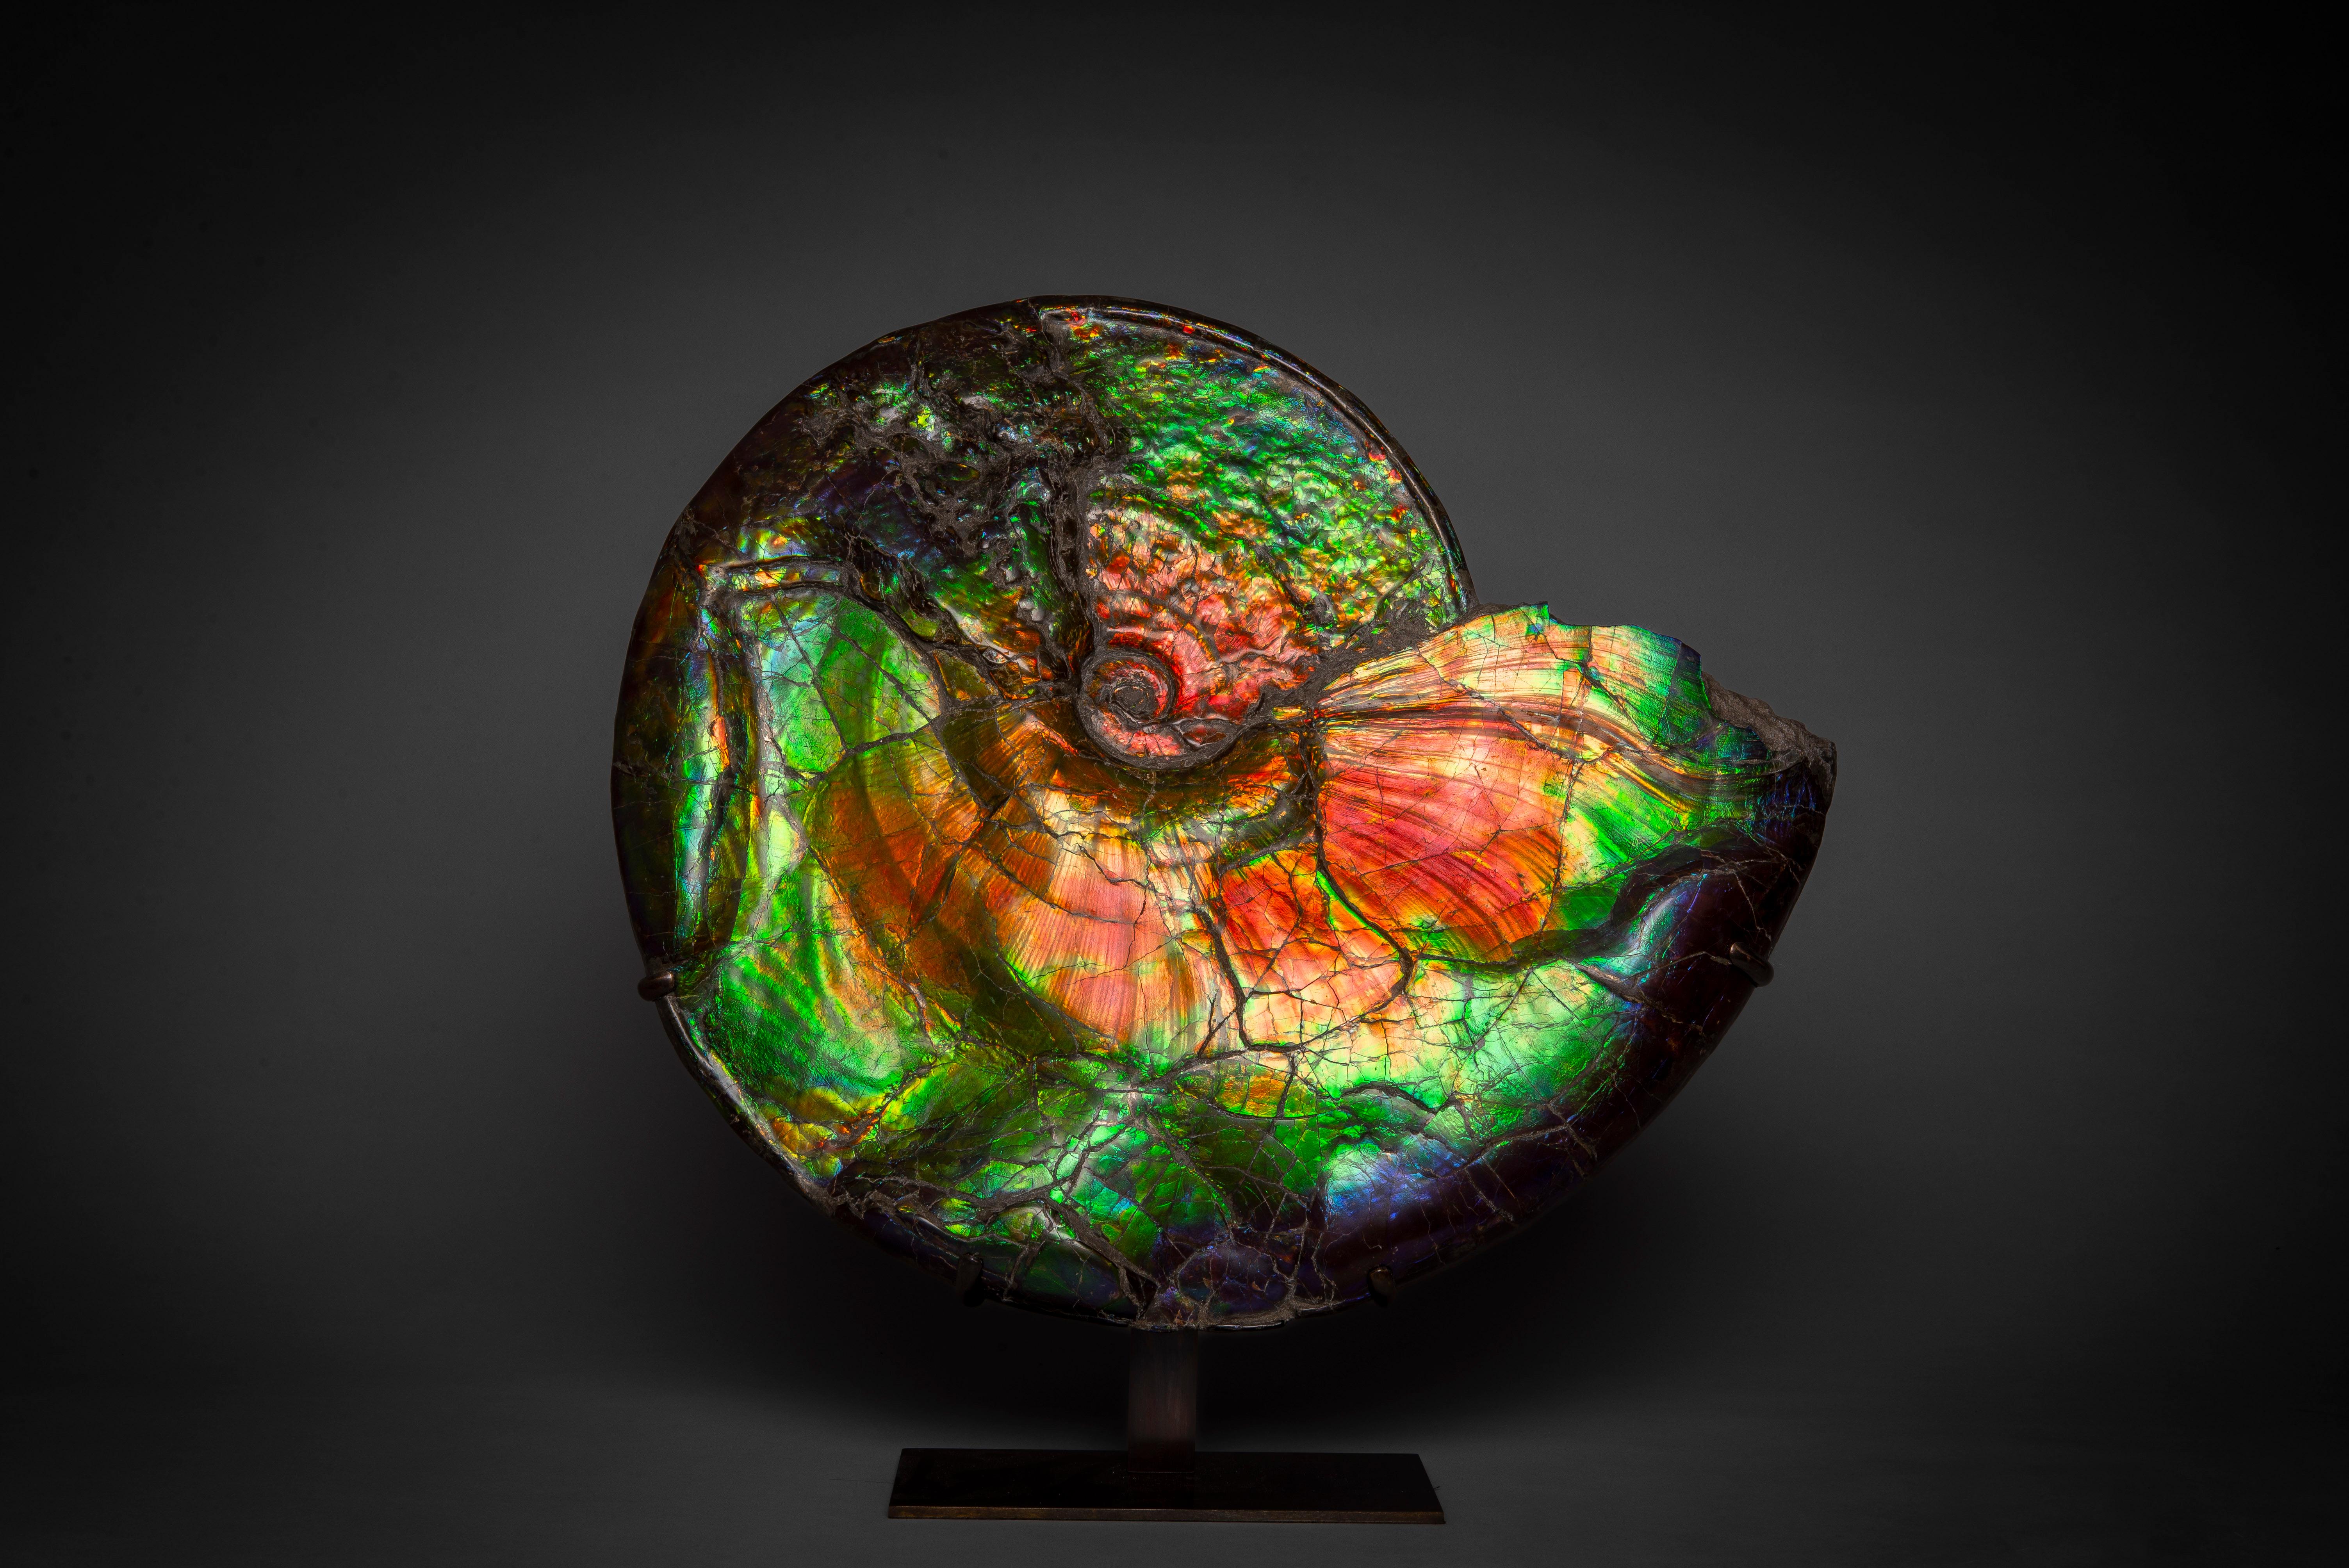 Large spectacular iridescent ammonite fossil.
75 Million y/o

A magnificent example of one of the most spectacular fossils. A large and intensely vibrant ammonite, Placenticeras costatum, from the Bearpaw formation, Alberta, Canada, dating to the